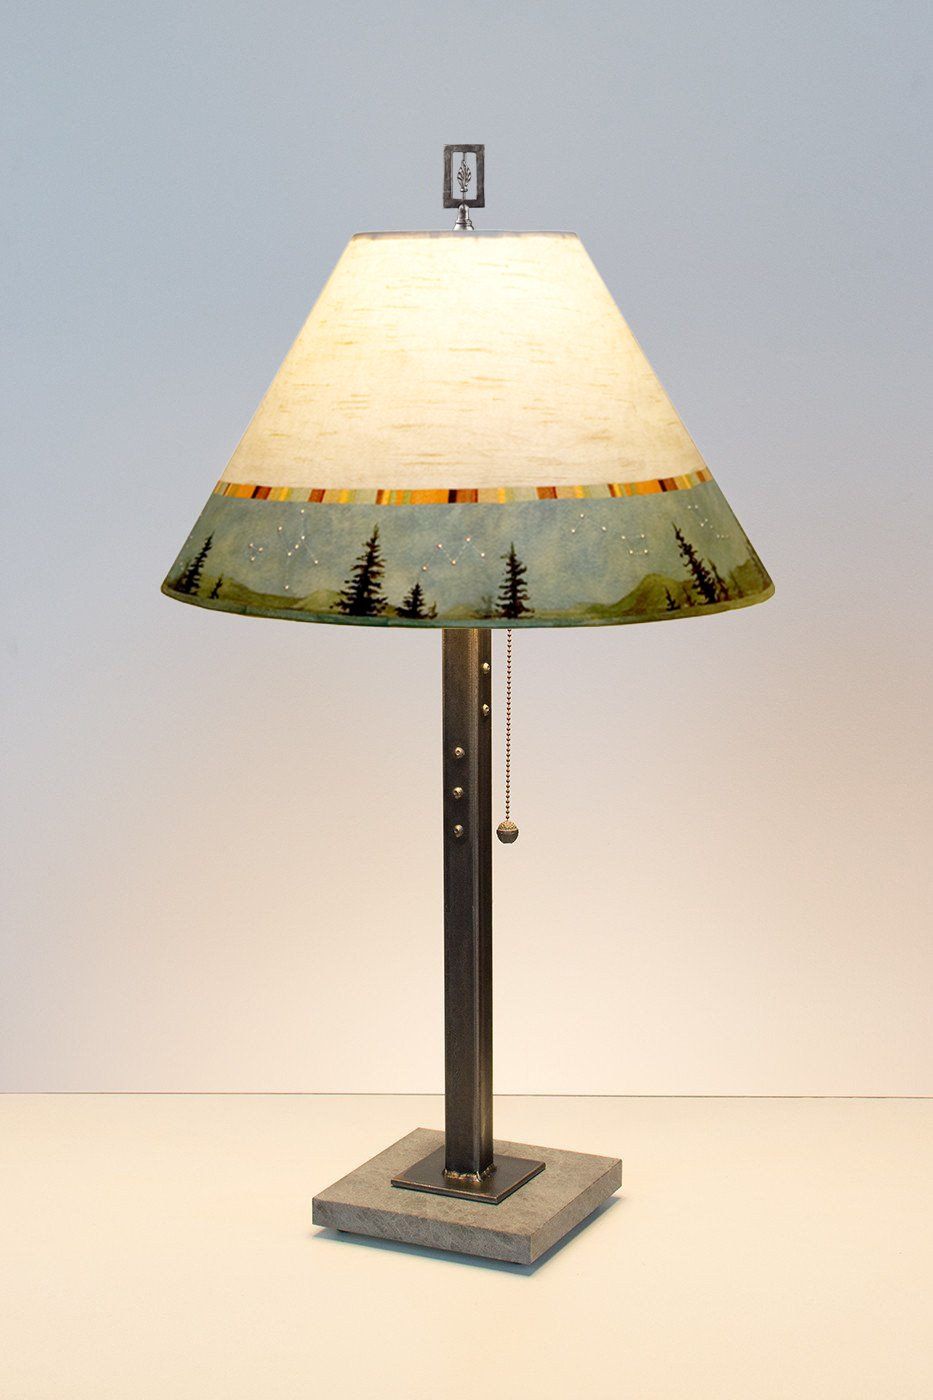 Steel Table Lamp with Medium Conical Shade in Birch Midnight